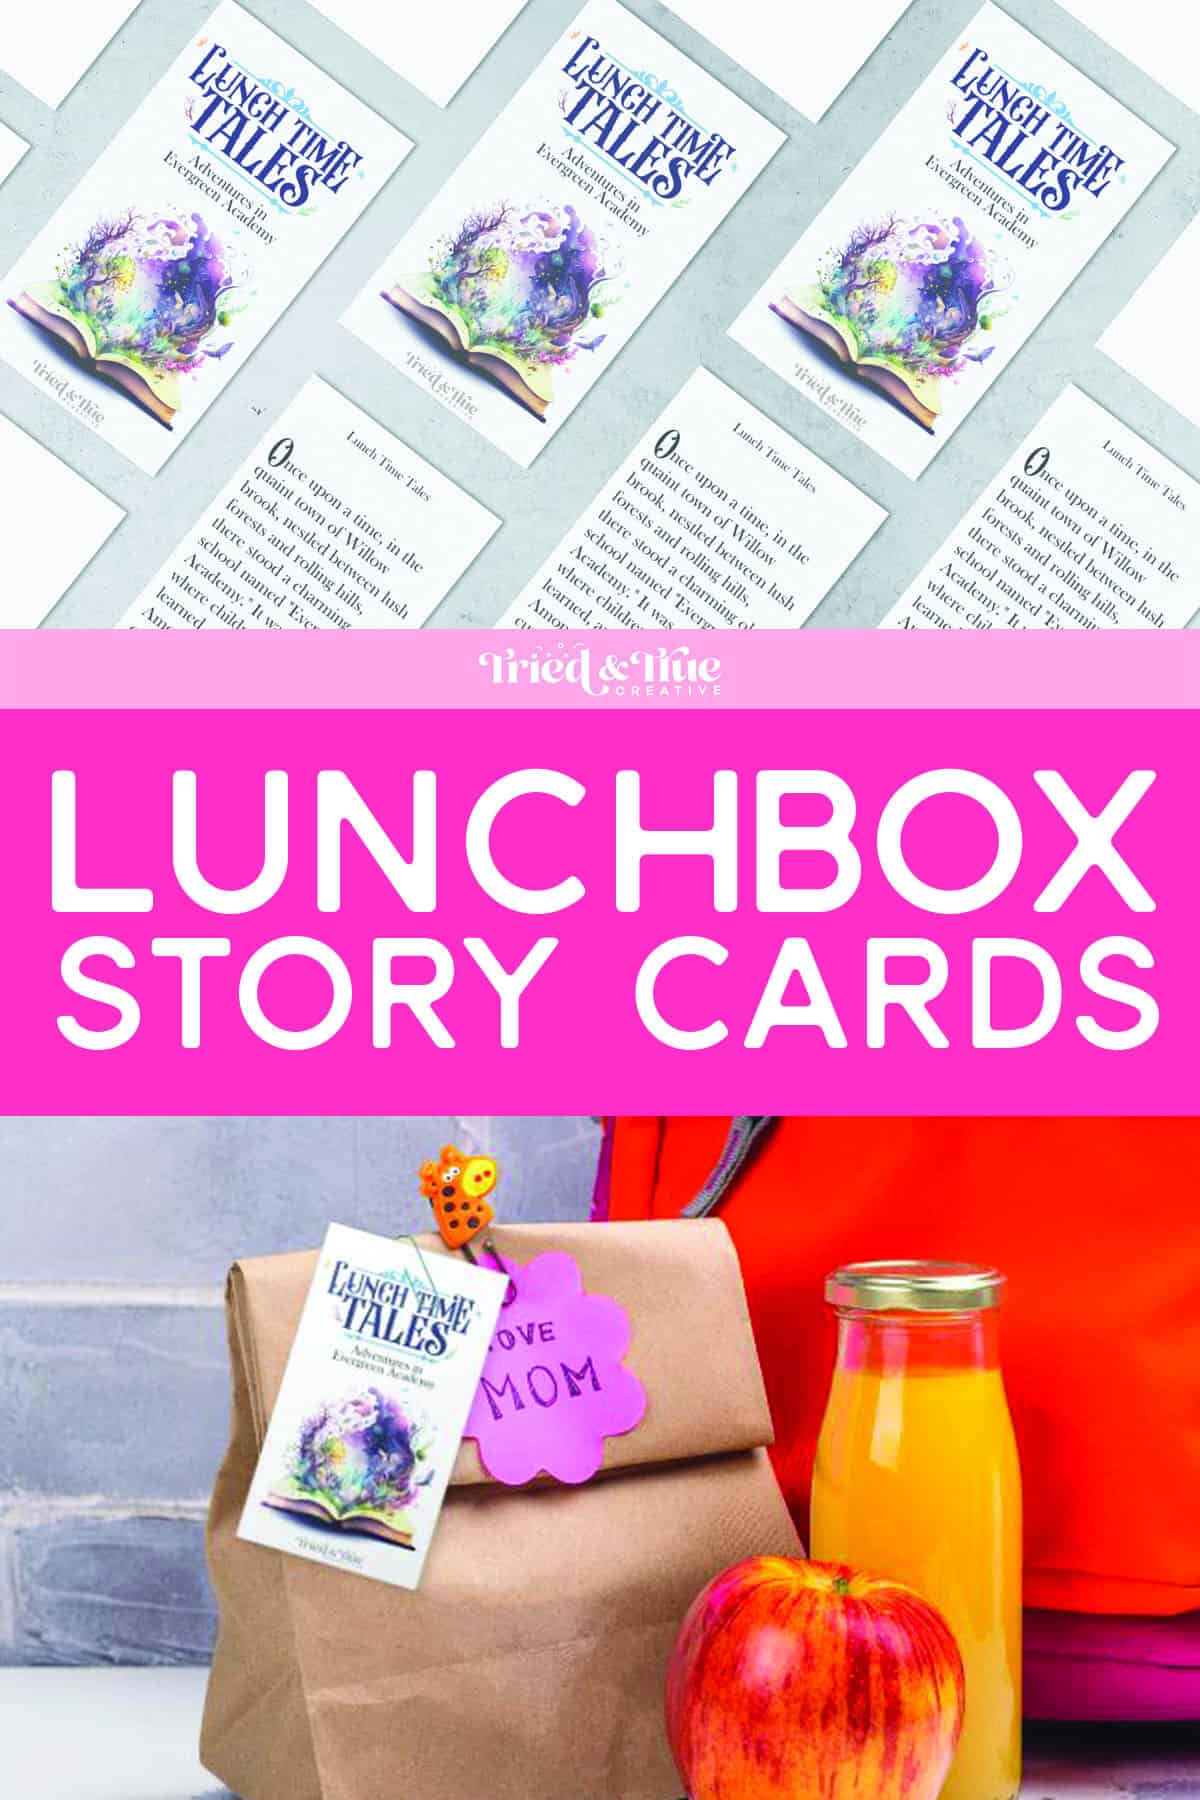 Free printable lunchbox story cards for kids.